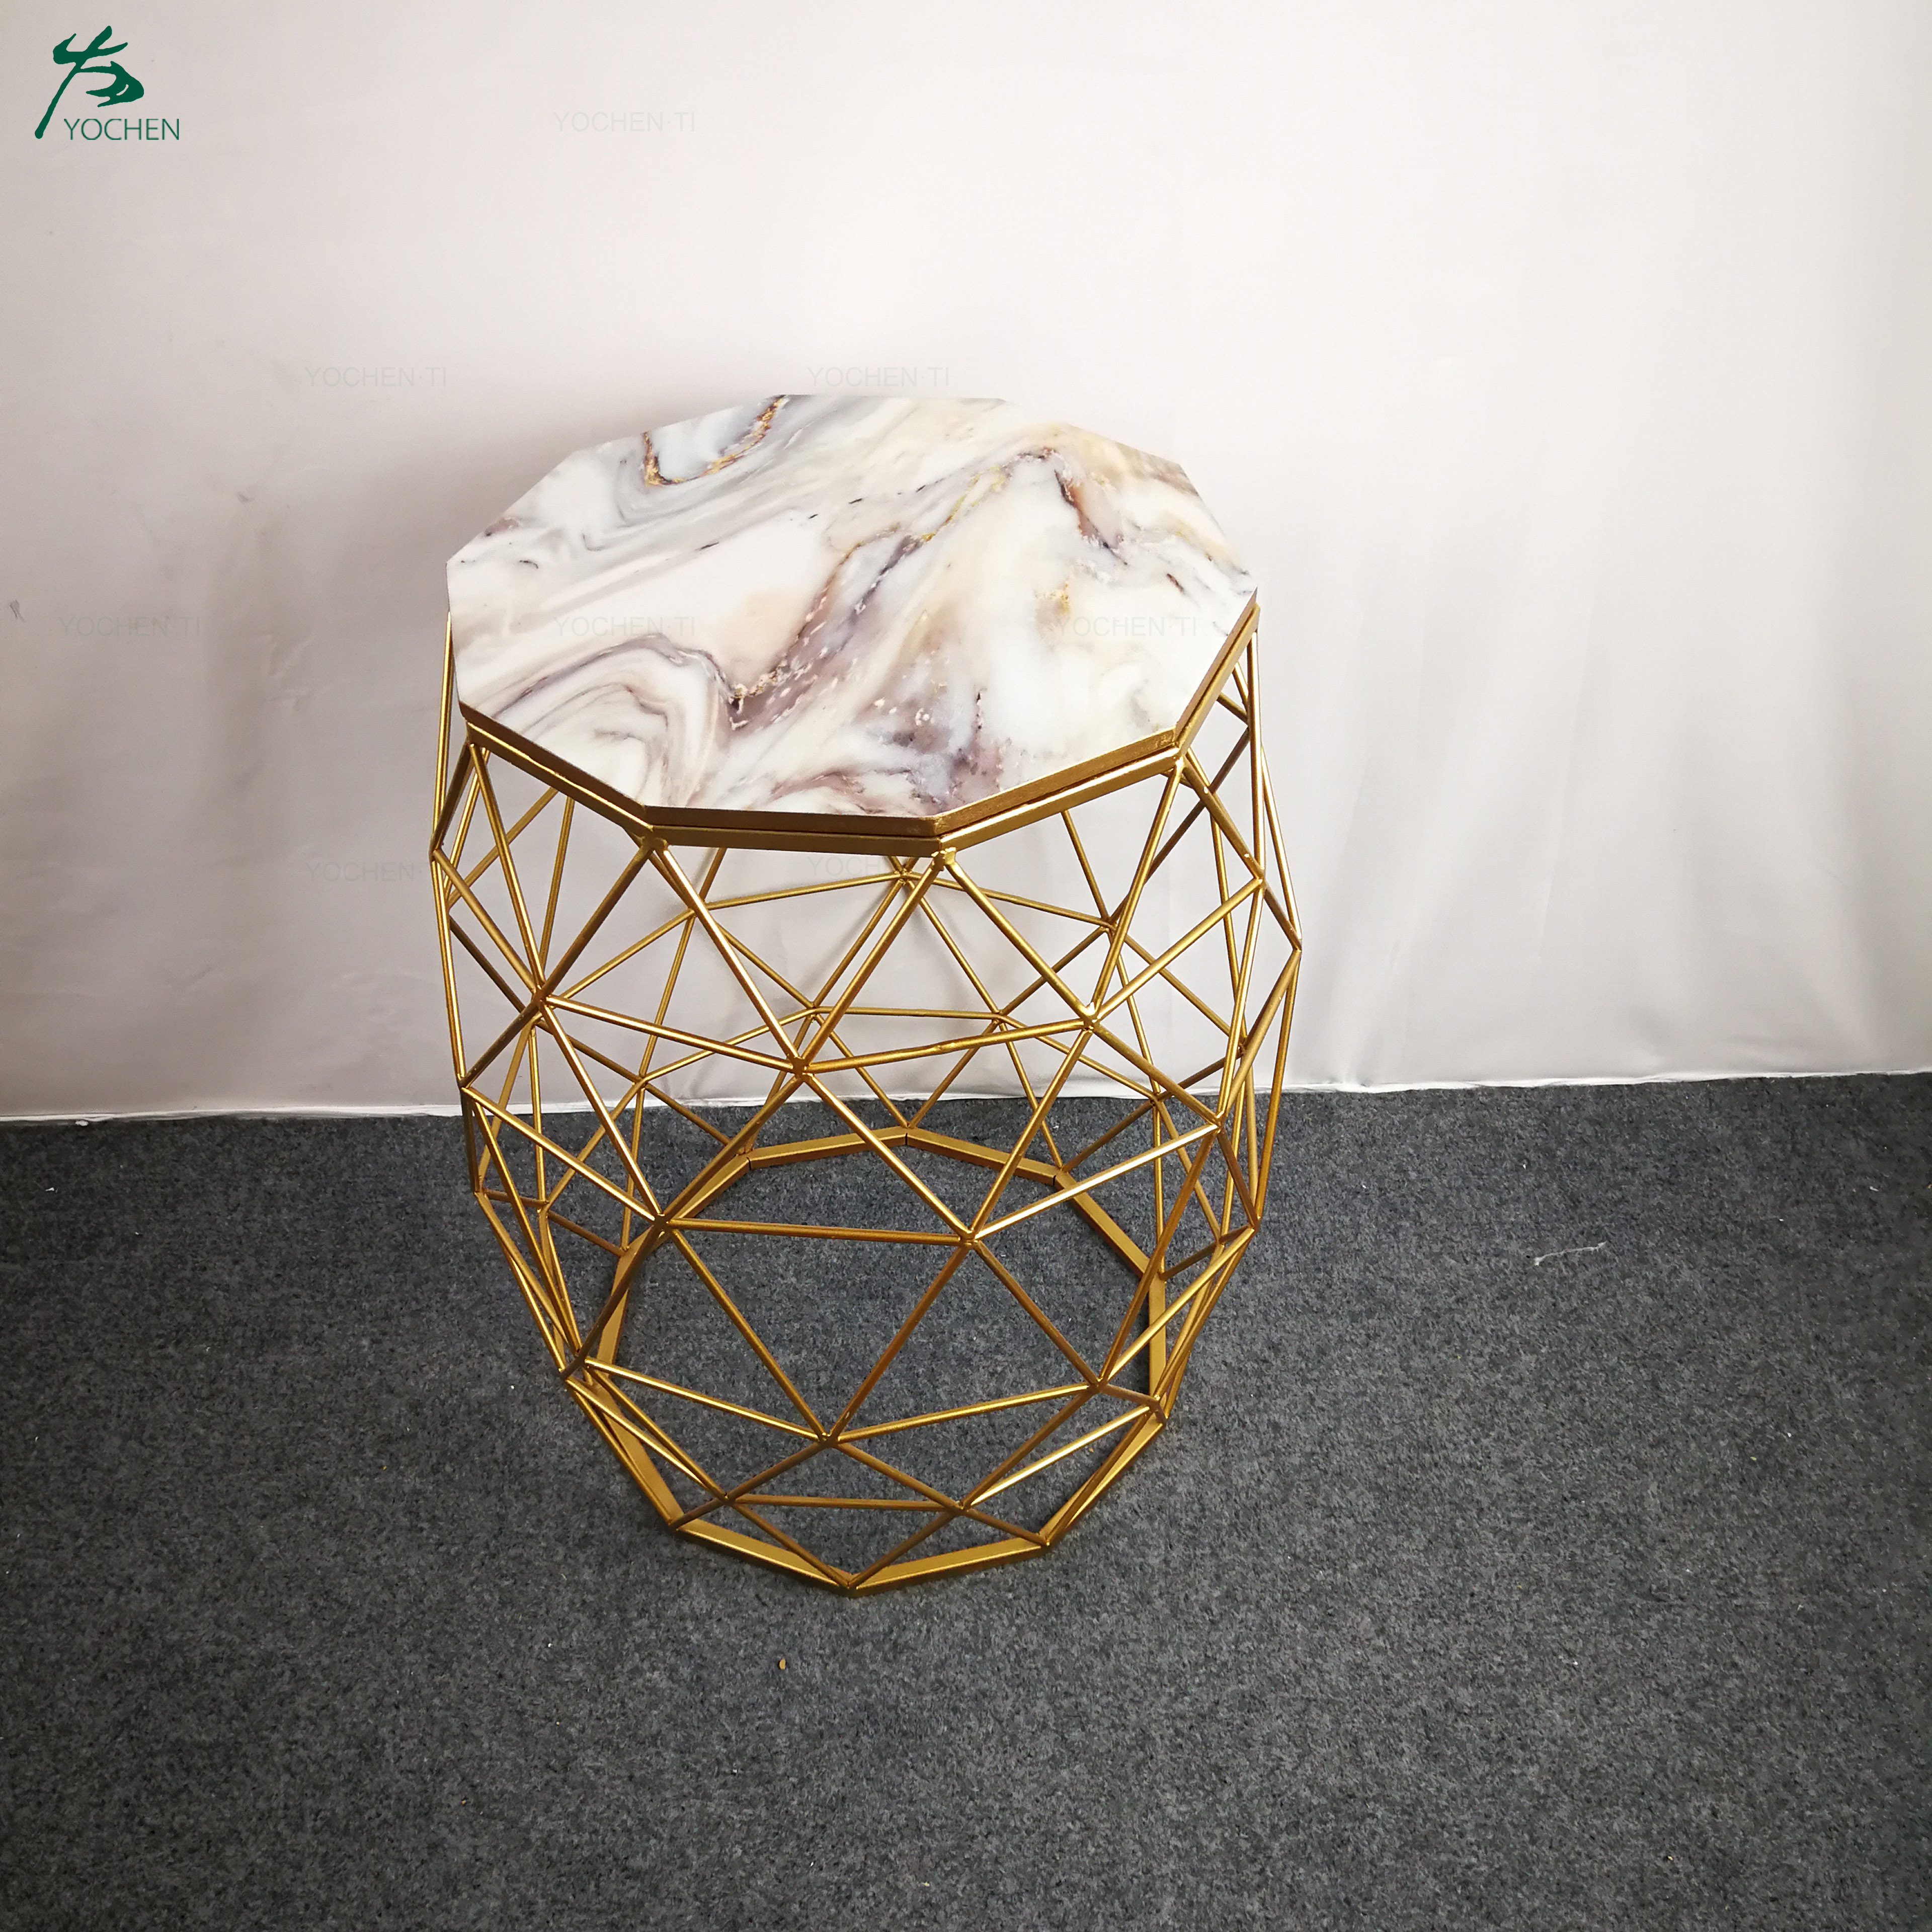 Rectangular Gold-Plated Metal Frame Side Table Marble Top End Table